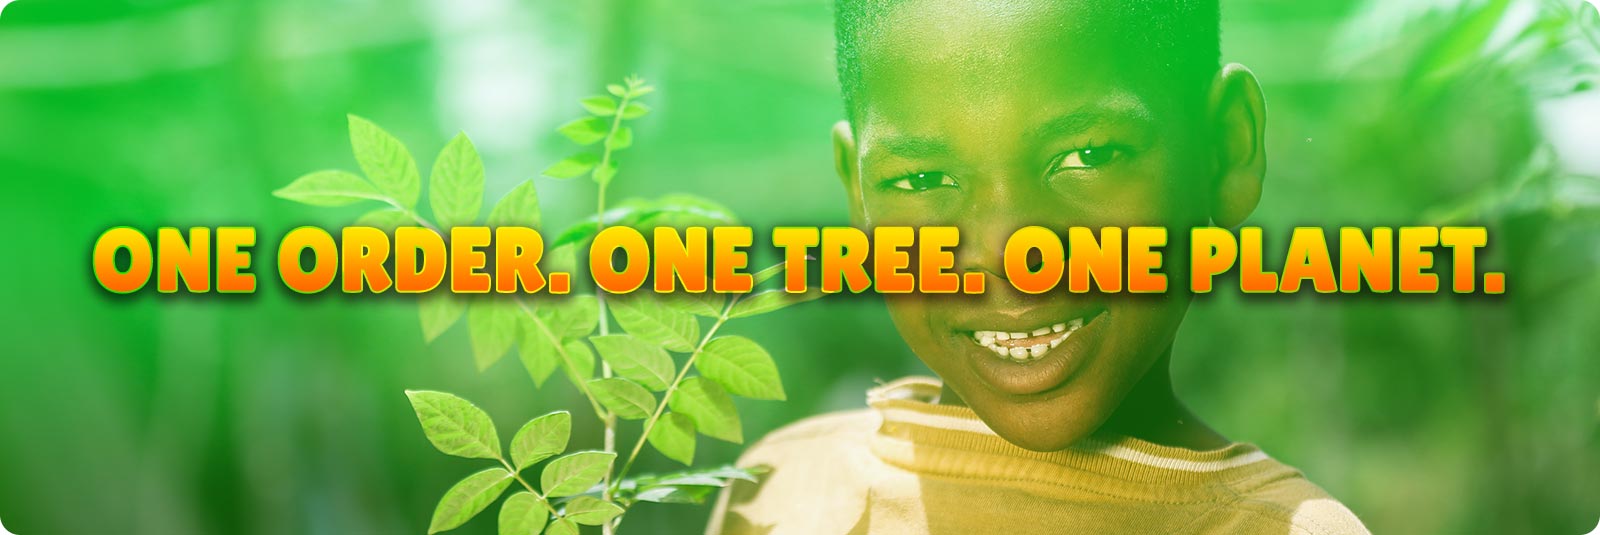 one order one tree one planet text over a picture with a young boy holding a tree sapling